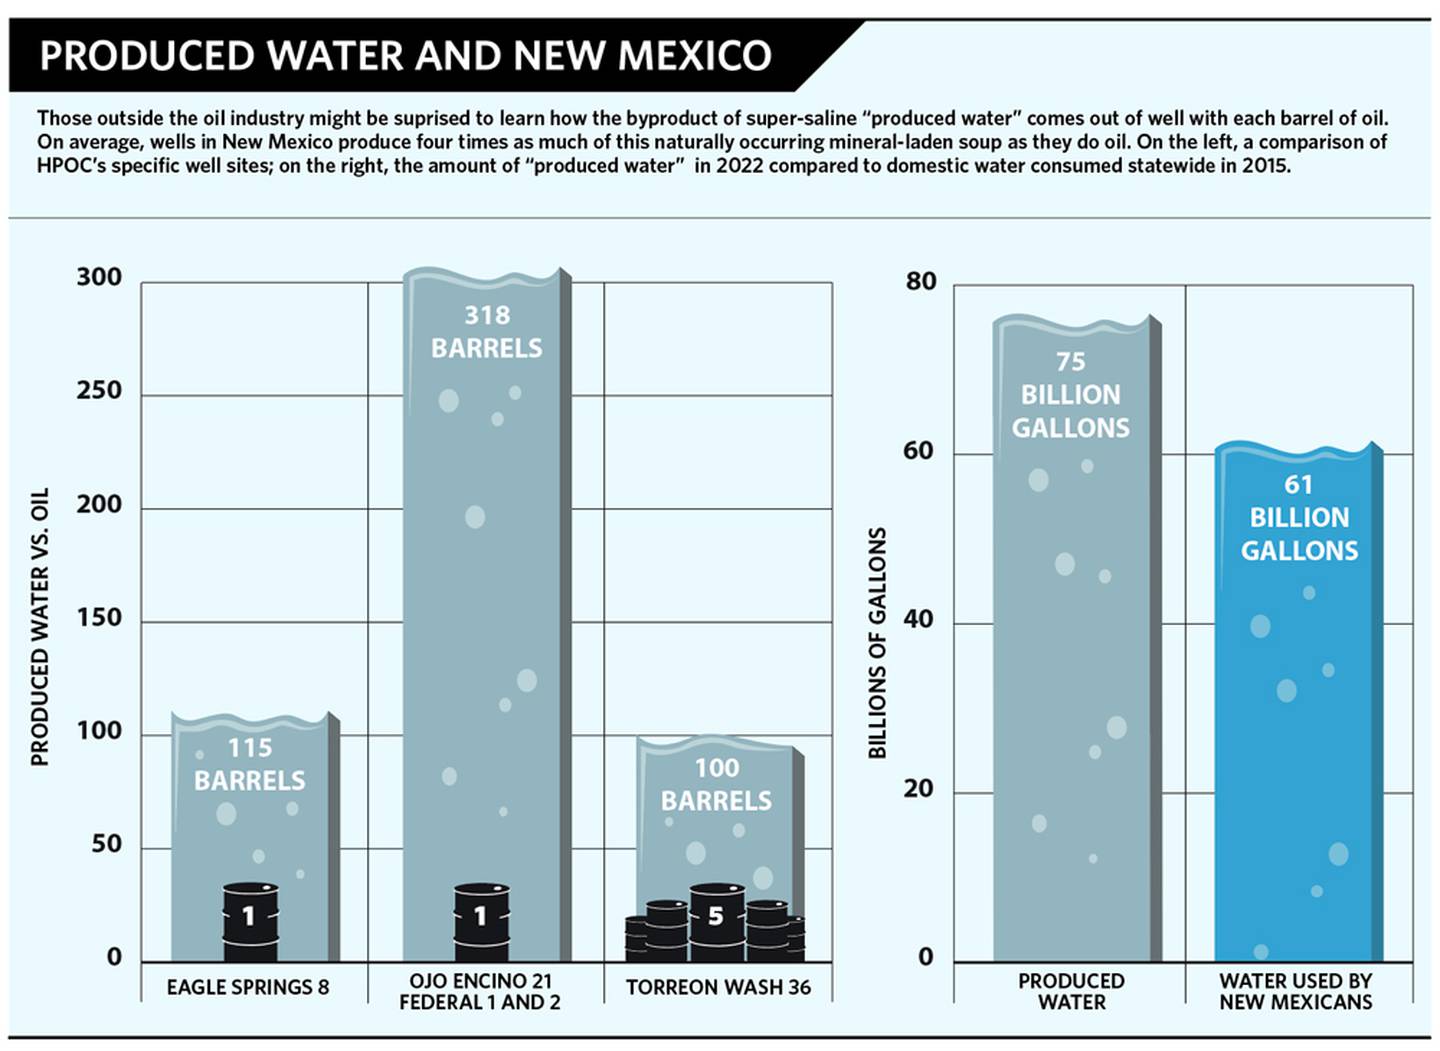 Those outside the oil industry might be surprised to learn how the byproduct of super-saline “produced water” comes out of well with each barrel of oil. On average, wells in New Mexico produce four times as much of this naturally occurring mineral-laden soup as they do oil. On the left, a comparison of HPOC’s specific well sites; on the right, the amount of “produced water” in 2022 compared to domestic water consumed statewide in 2015.